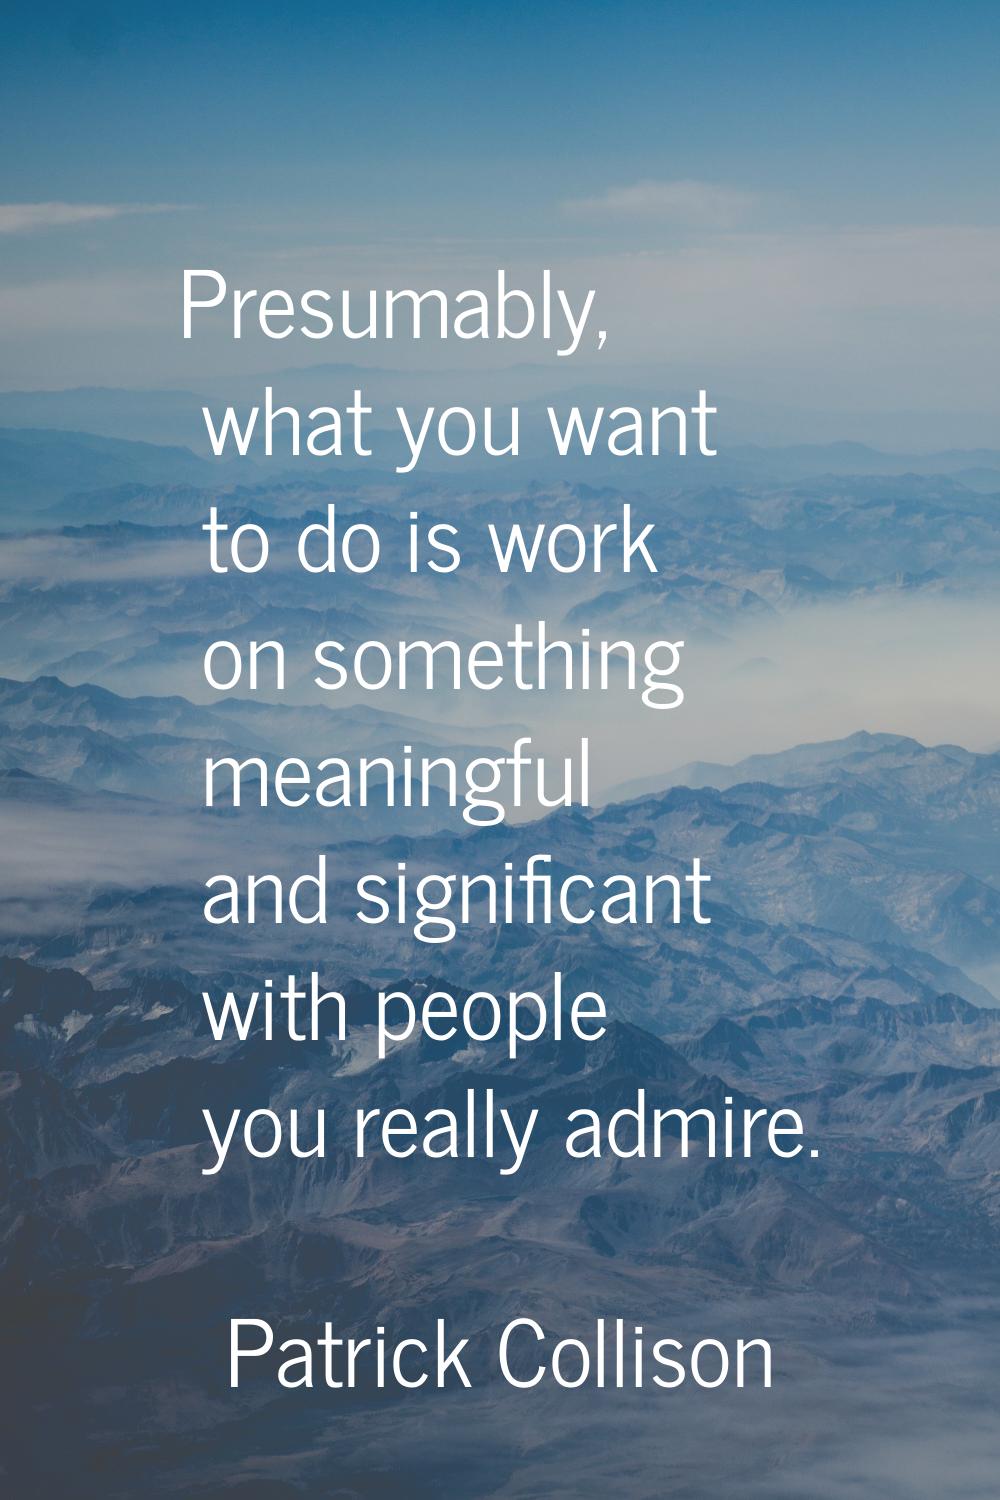 Presumably, what you want to do is work on something meaningful and significant with people you rea